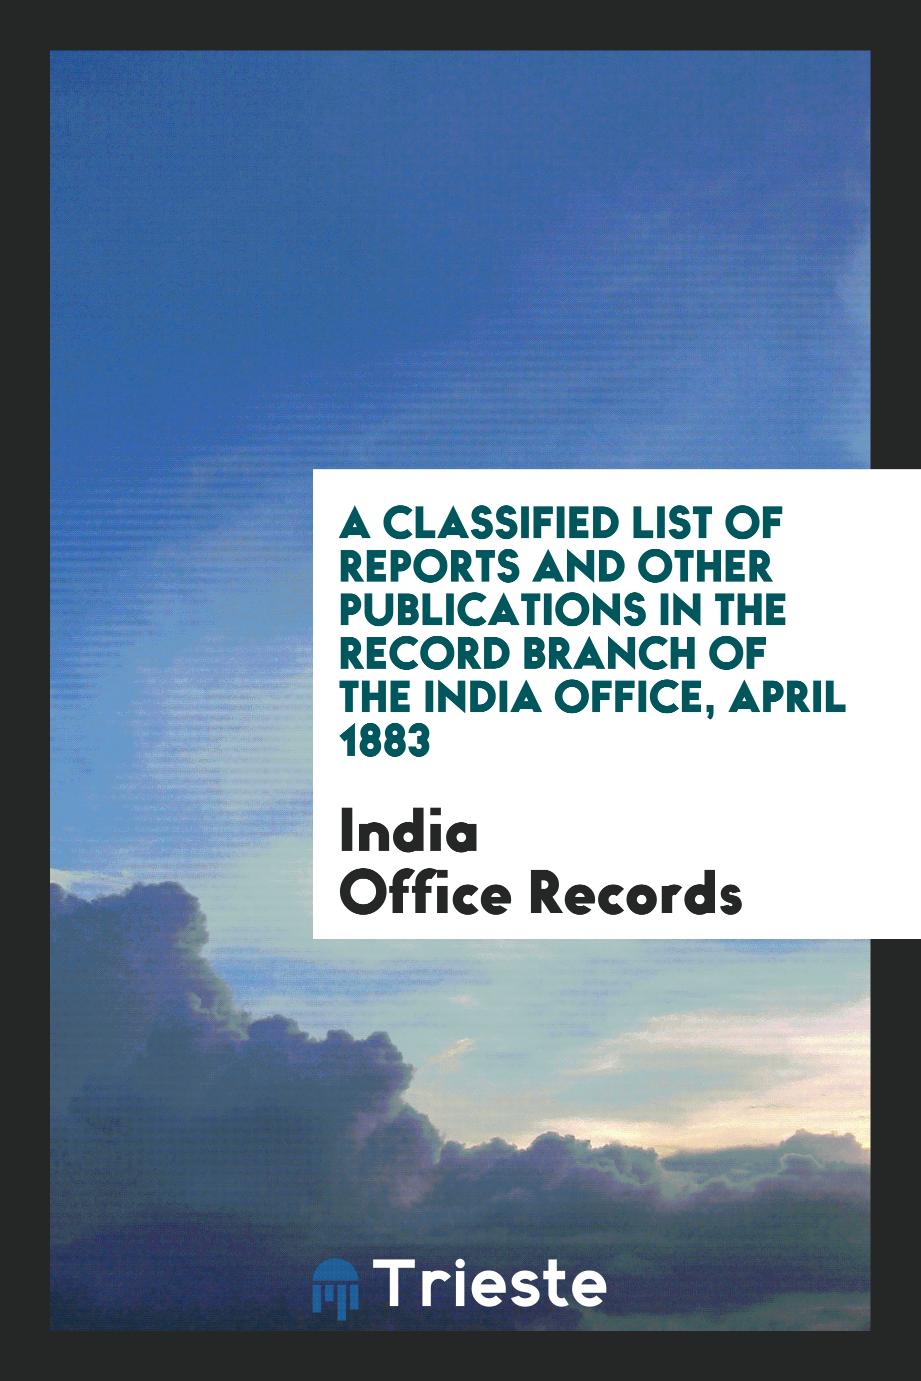 A Classified List of Reports and Other Publications in the Record Branch of the India Office, April 1883